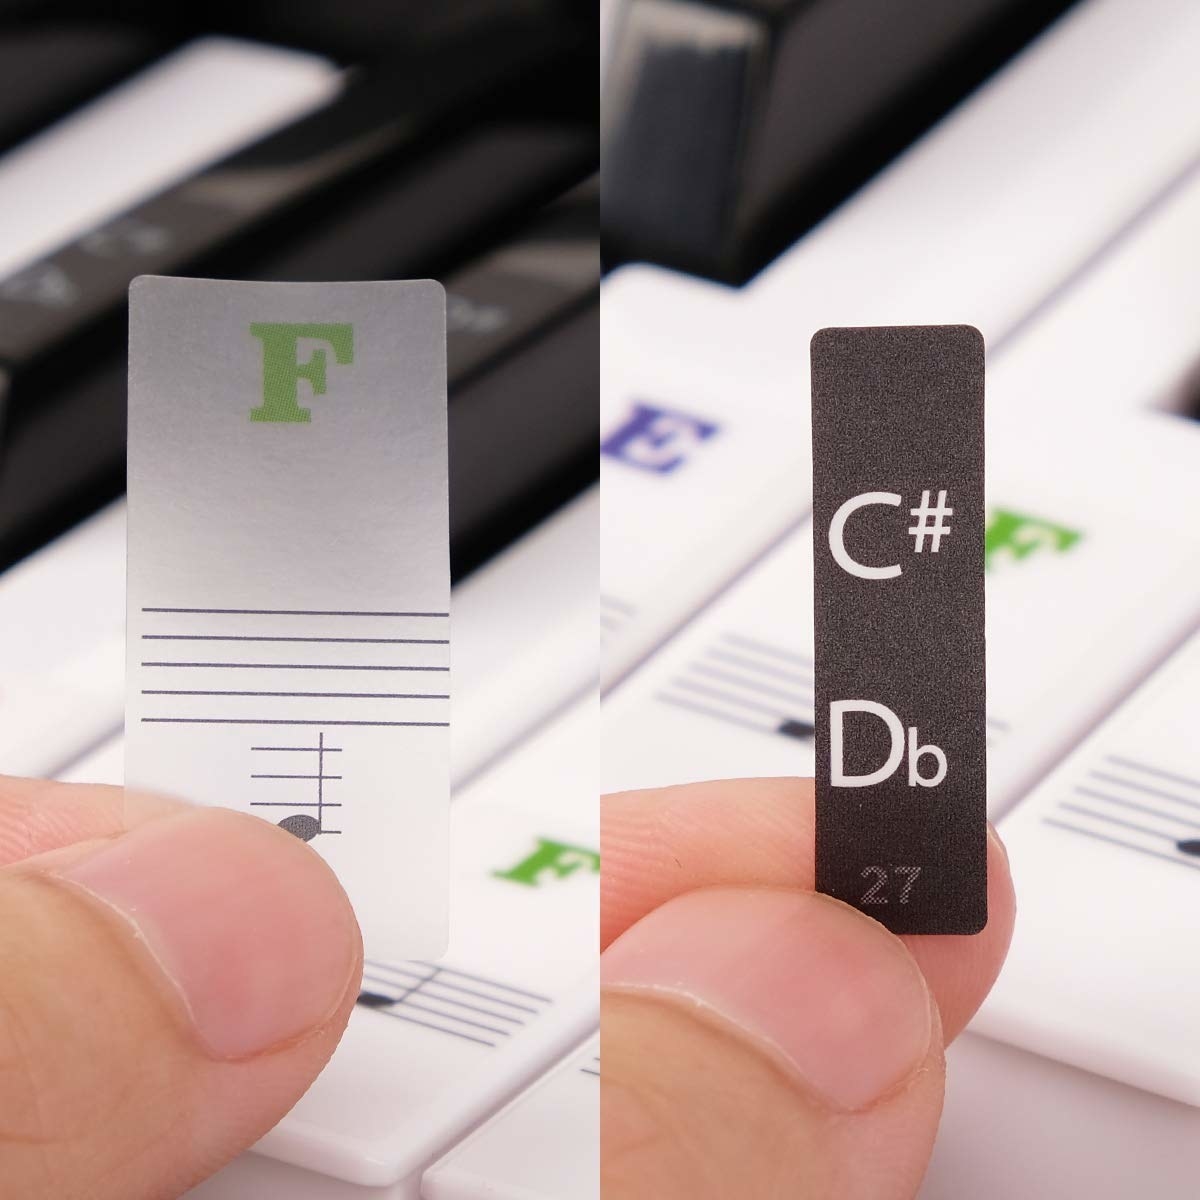 Piano key stickers for both white and black keys denoting F and C# keys respectively